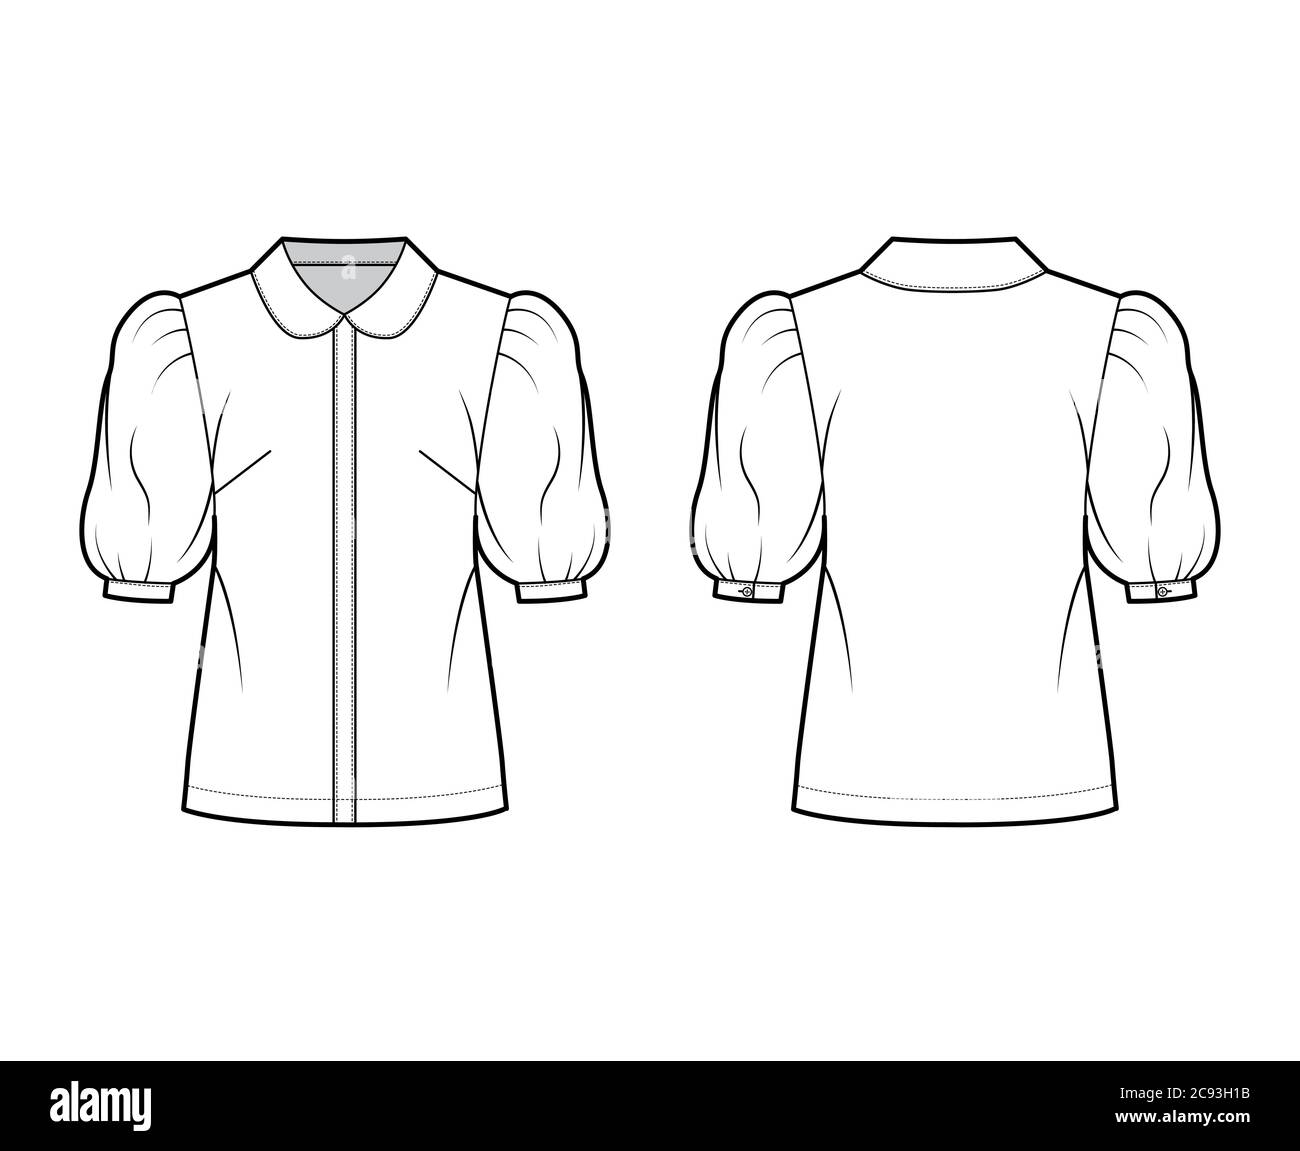 Elbow puff sleeve shirt technical fashion illustration with round collar, front button-fastening, loose silhouette. Flat blouse apparel template front, back white color. Women, men unisex top CAD Stock Vector